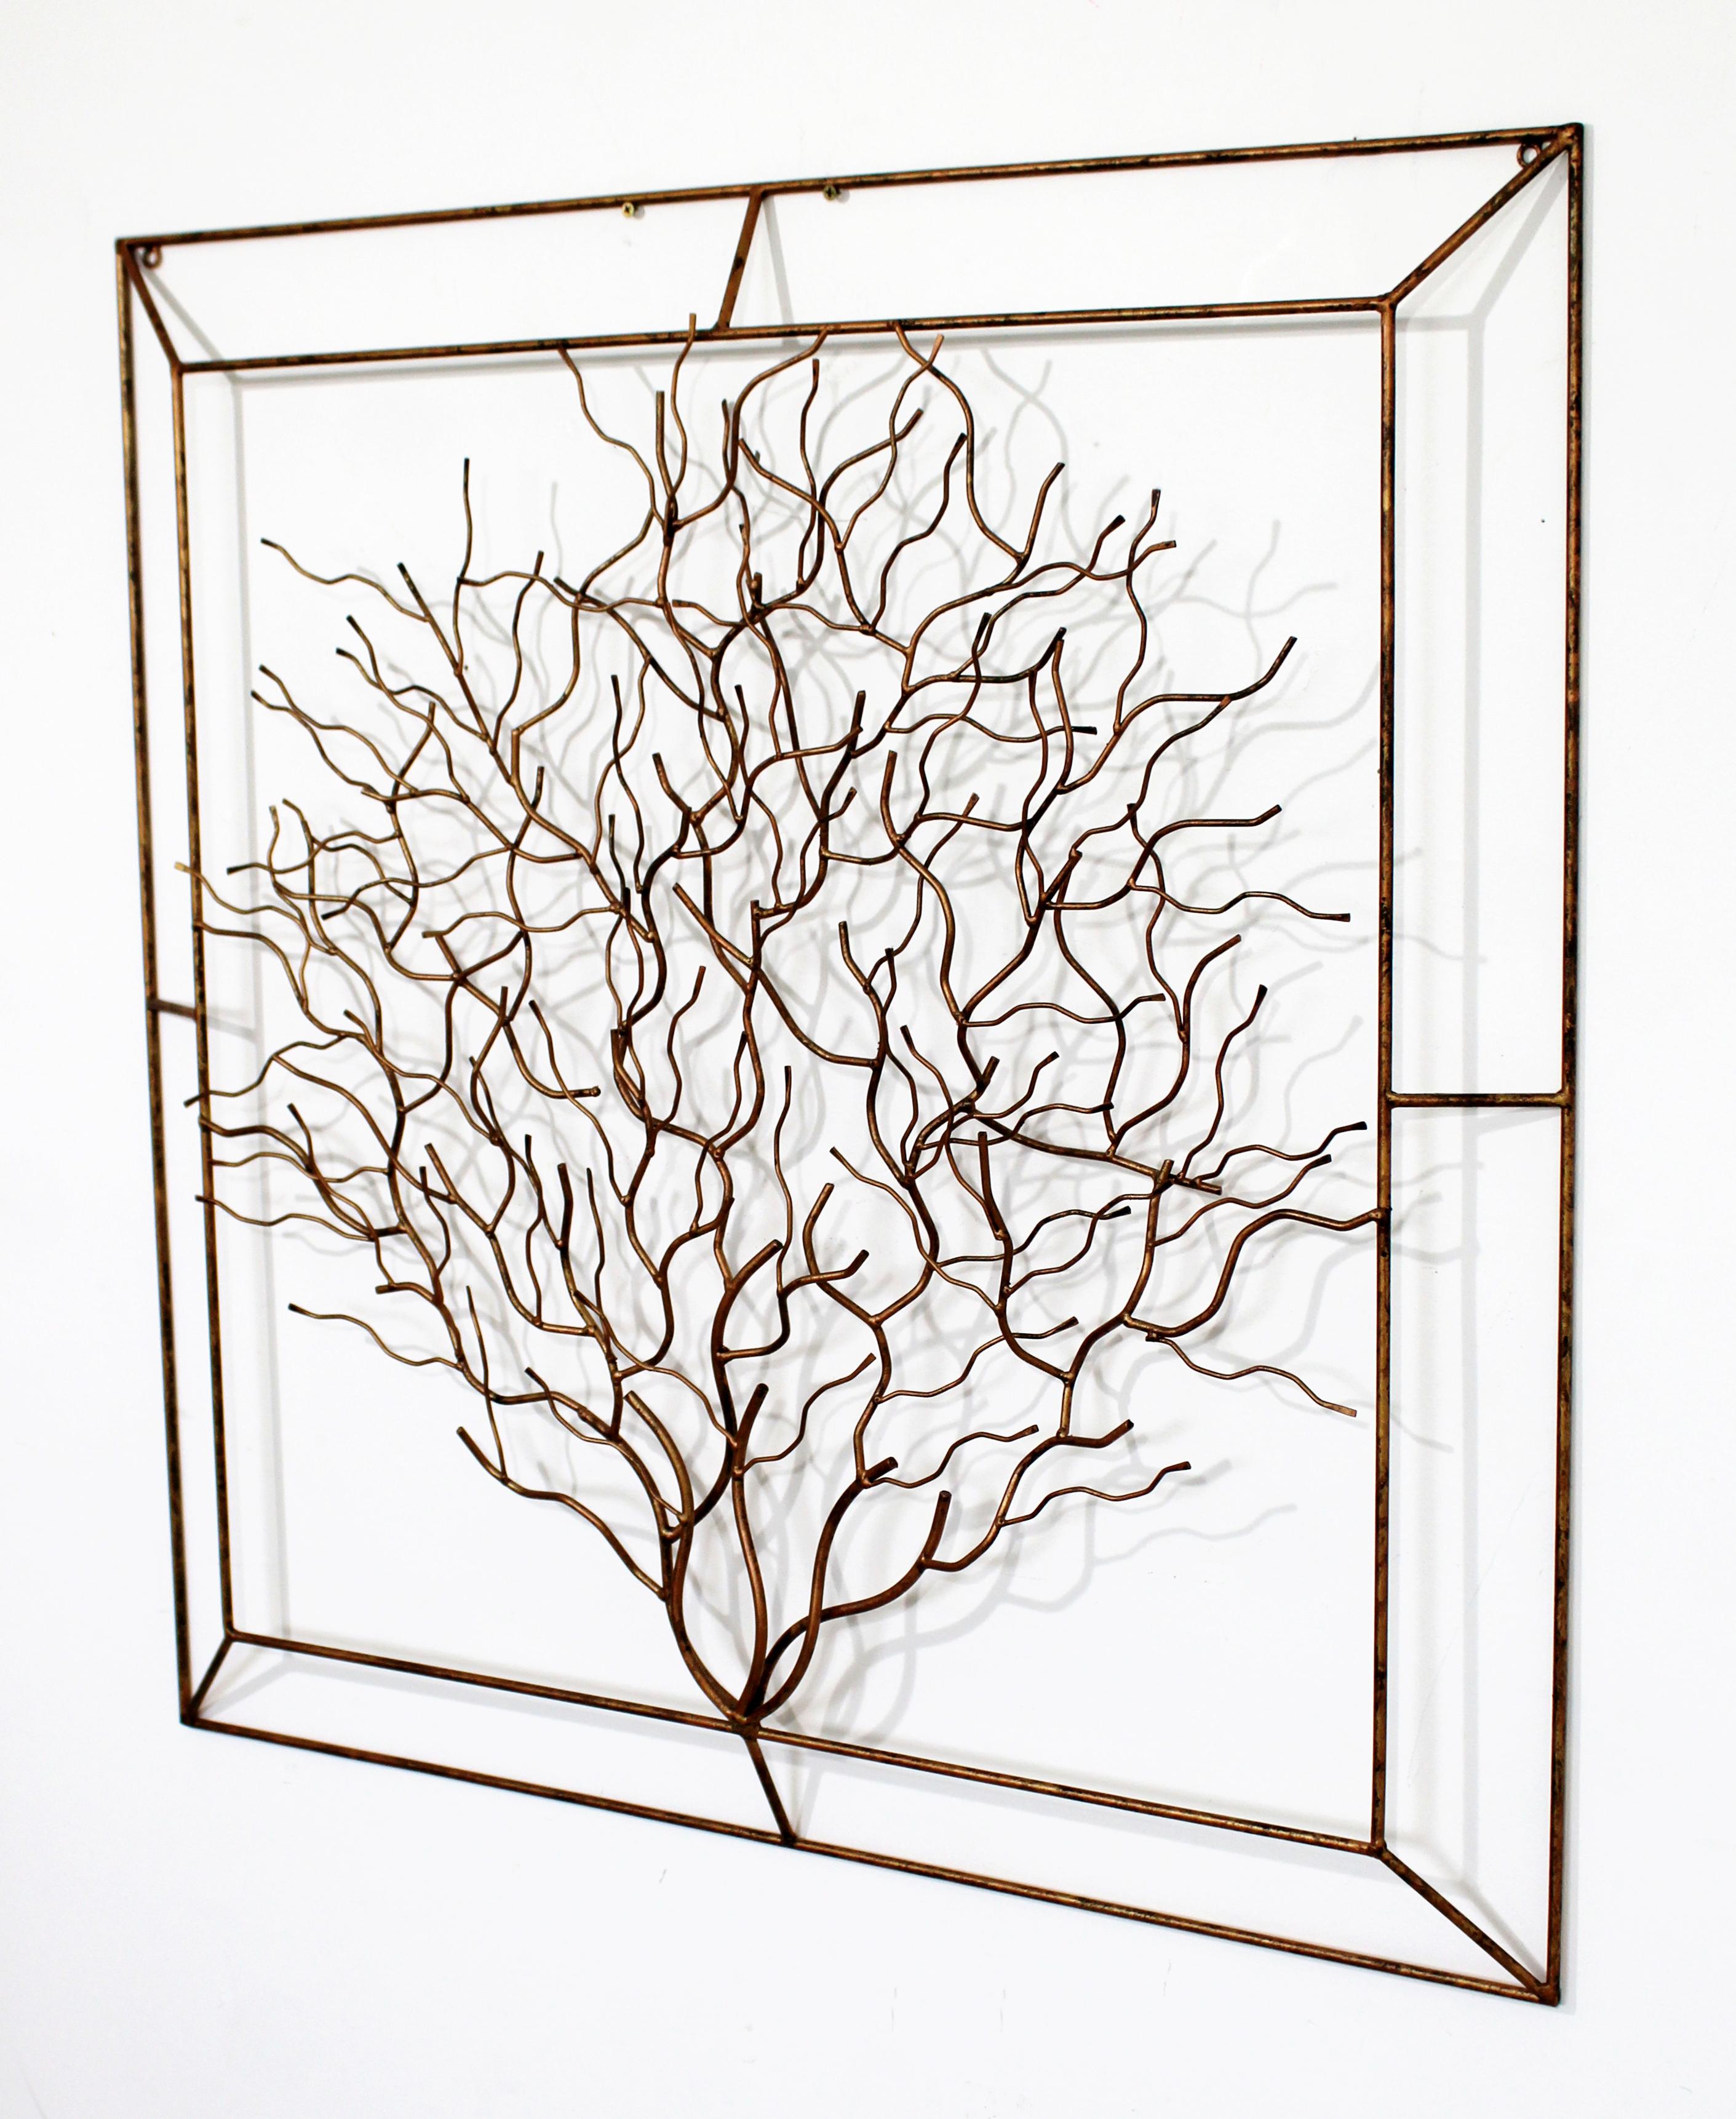 For your consideration is a marvelous, self-framed, metal wall art sculpture, of an abstracted tree, circa 1980s. In excellent vintage condition. The dimensions are 36